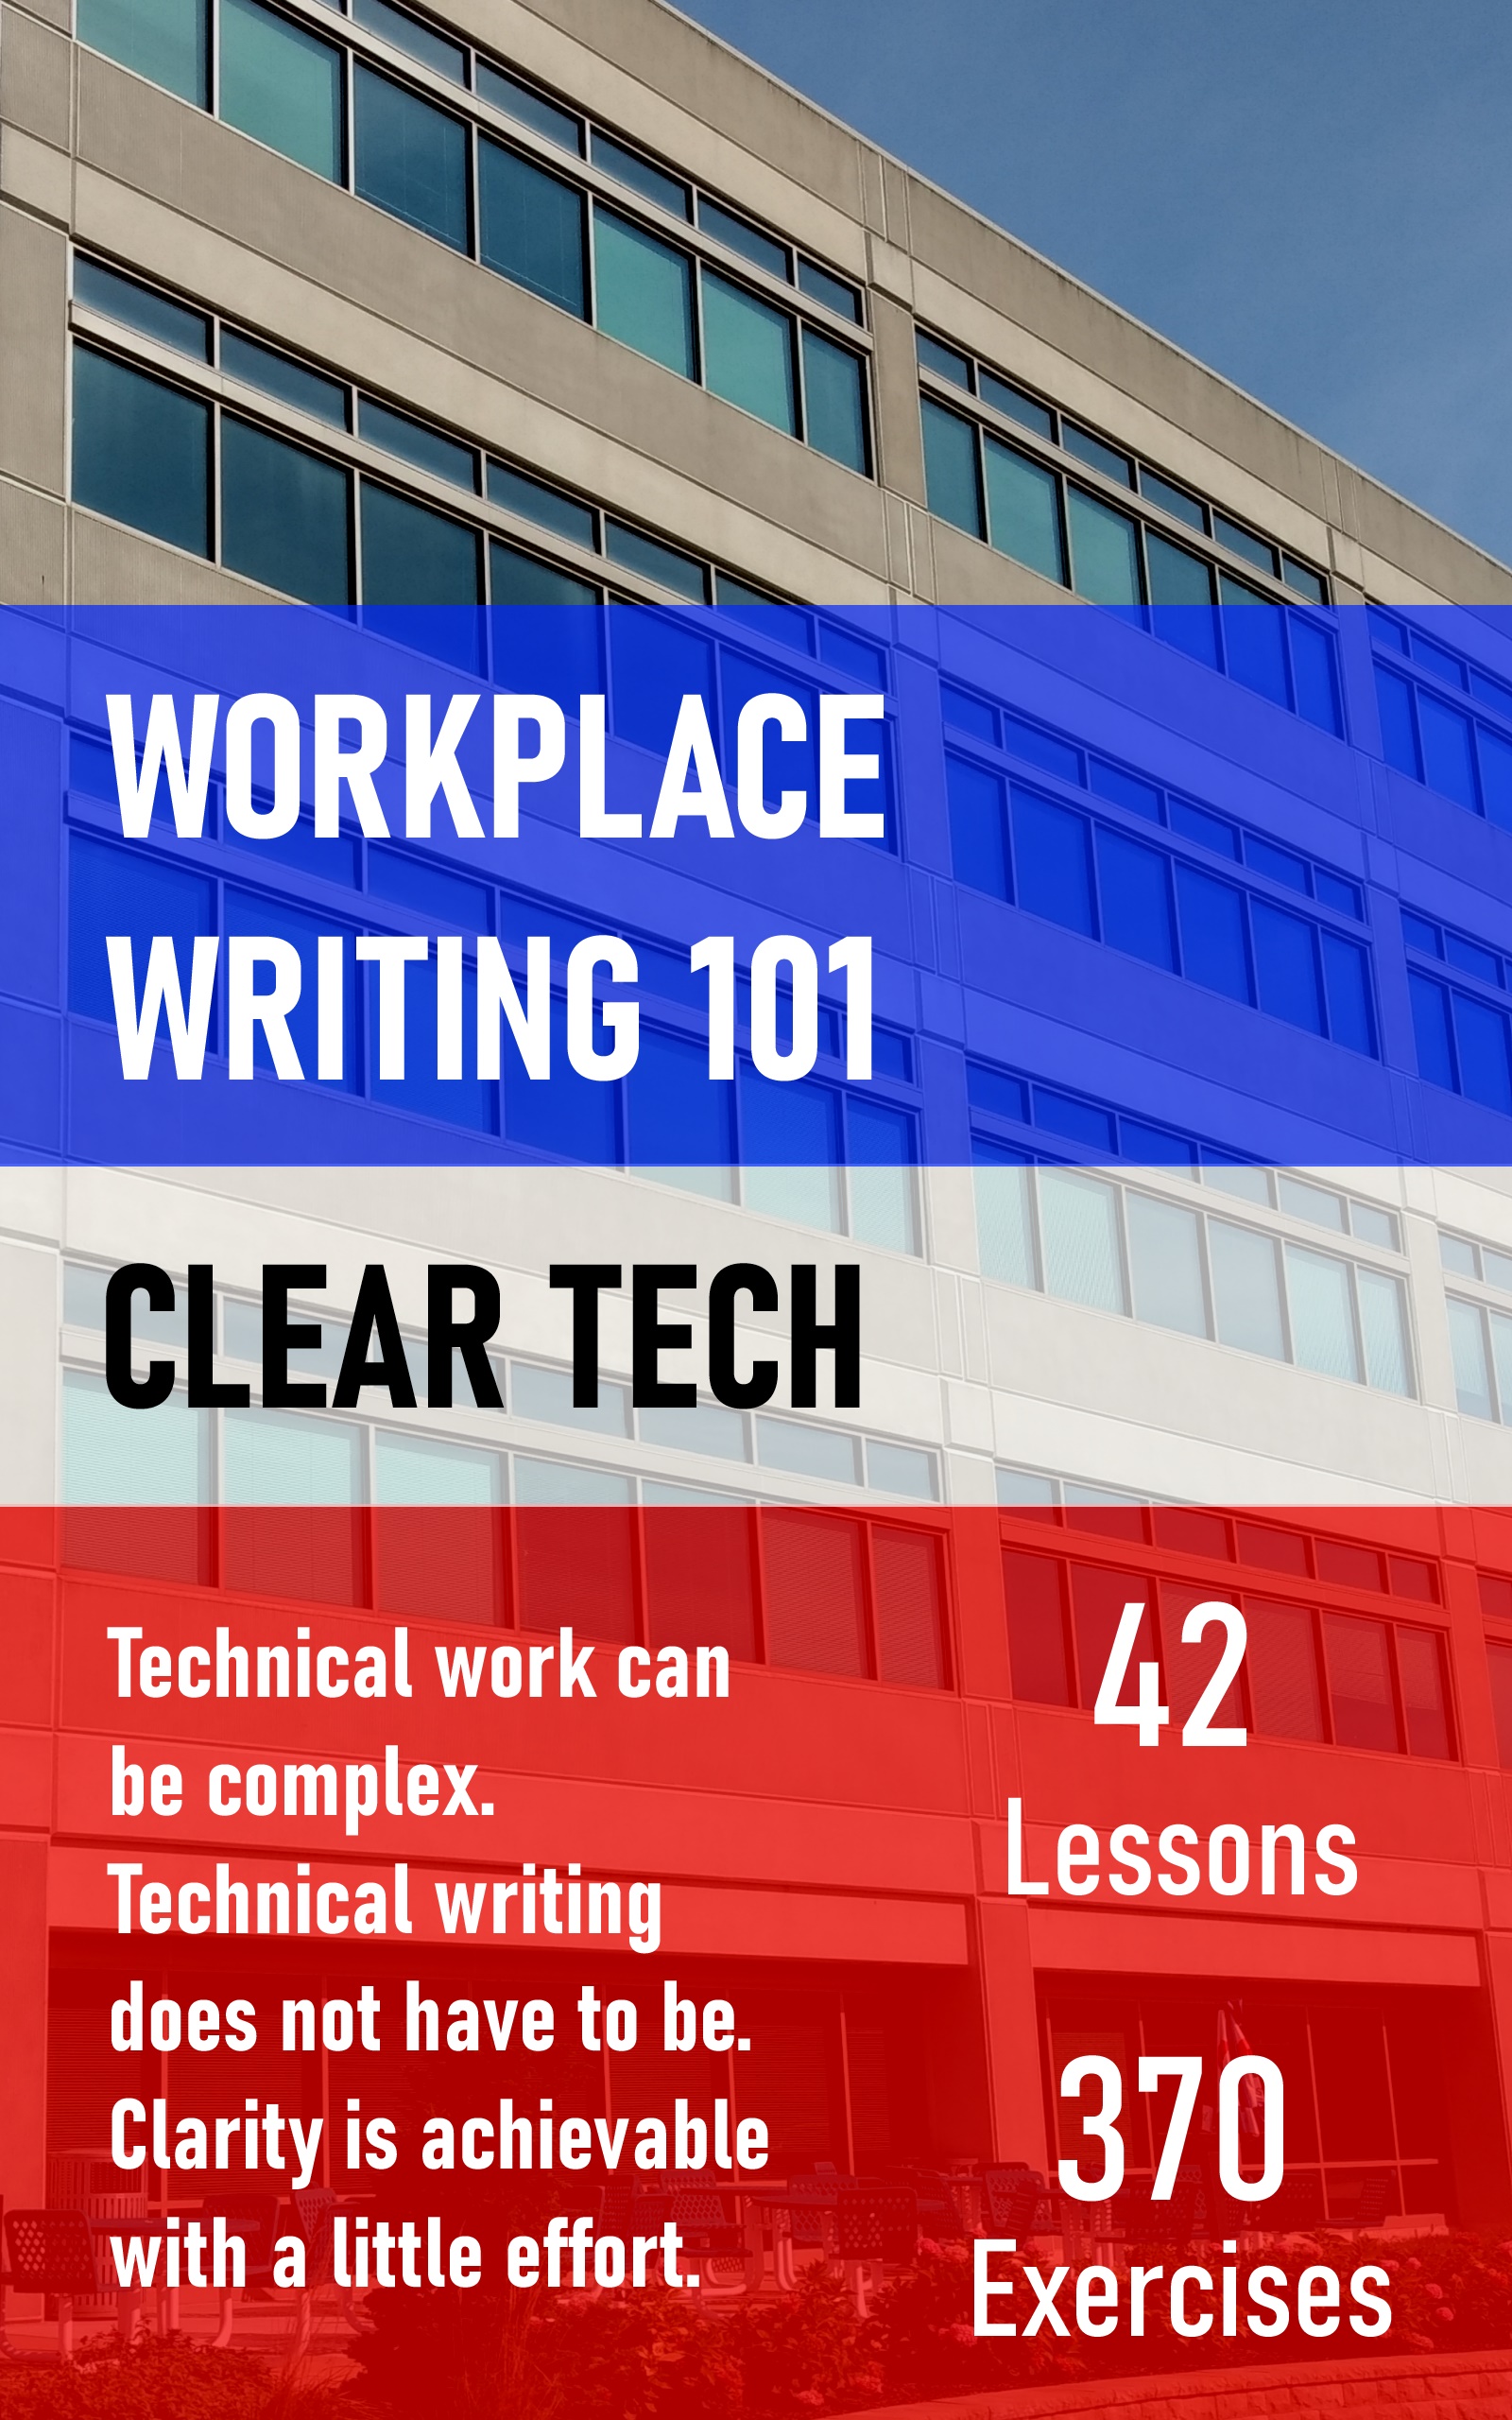 Workplace Writing 101 - Clear Tech